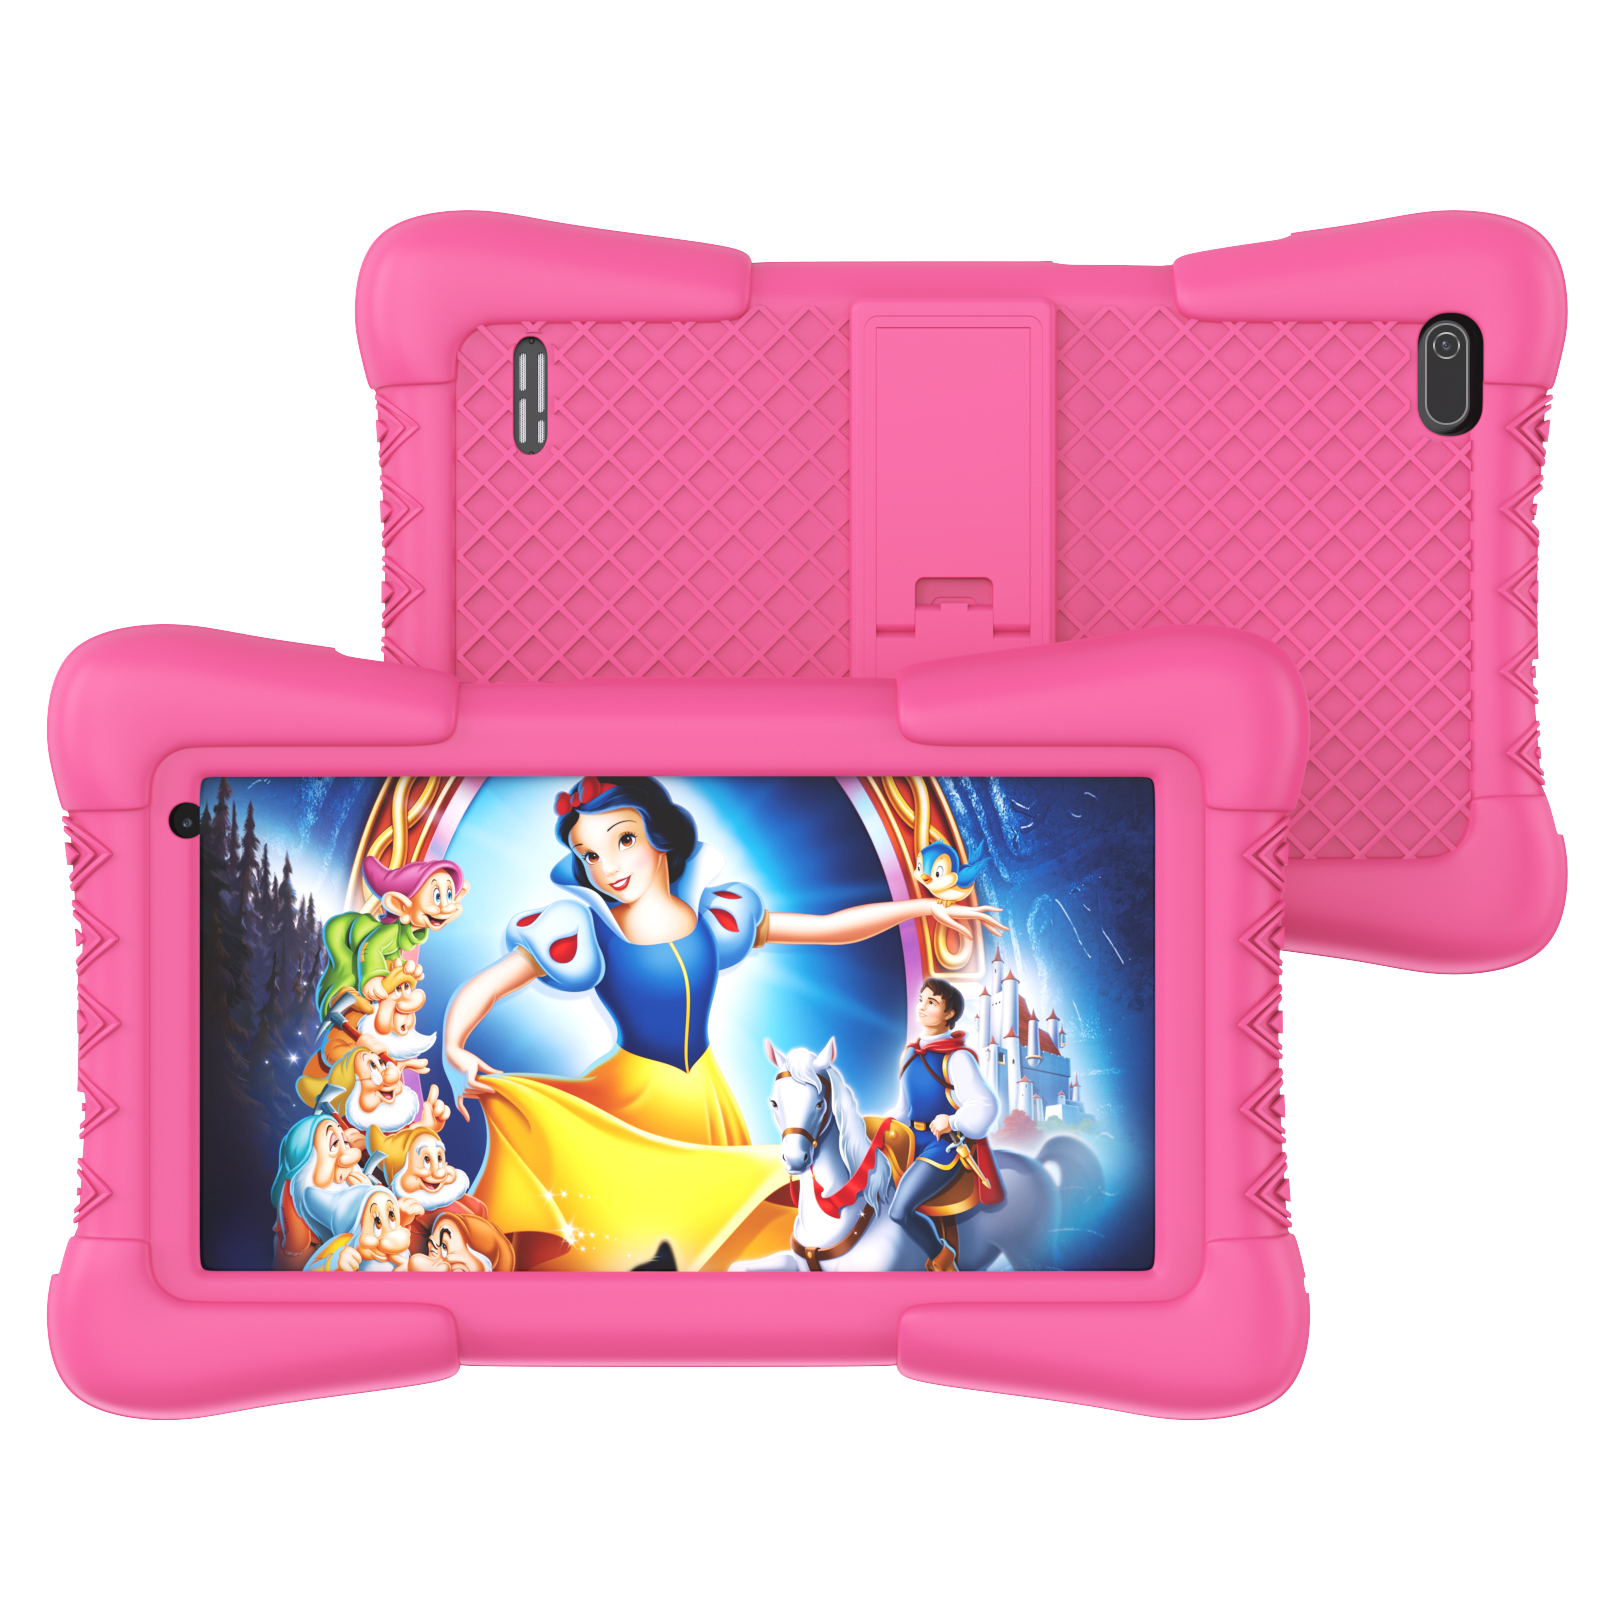 Kids Tablet 7 inch, 2GB RAM, 32GB ROM, Android 11, Kids App Pre Installed, 1.8GHz Quad Core Processor, IPS HD Display, 7” Android Tablet, WiFi, Kid-Proof Case, Pink